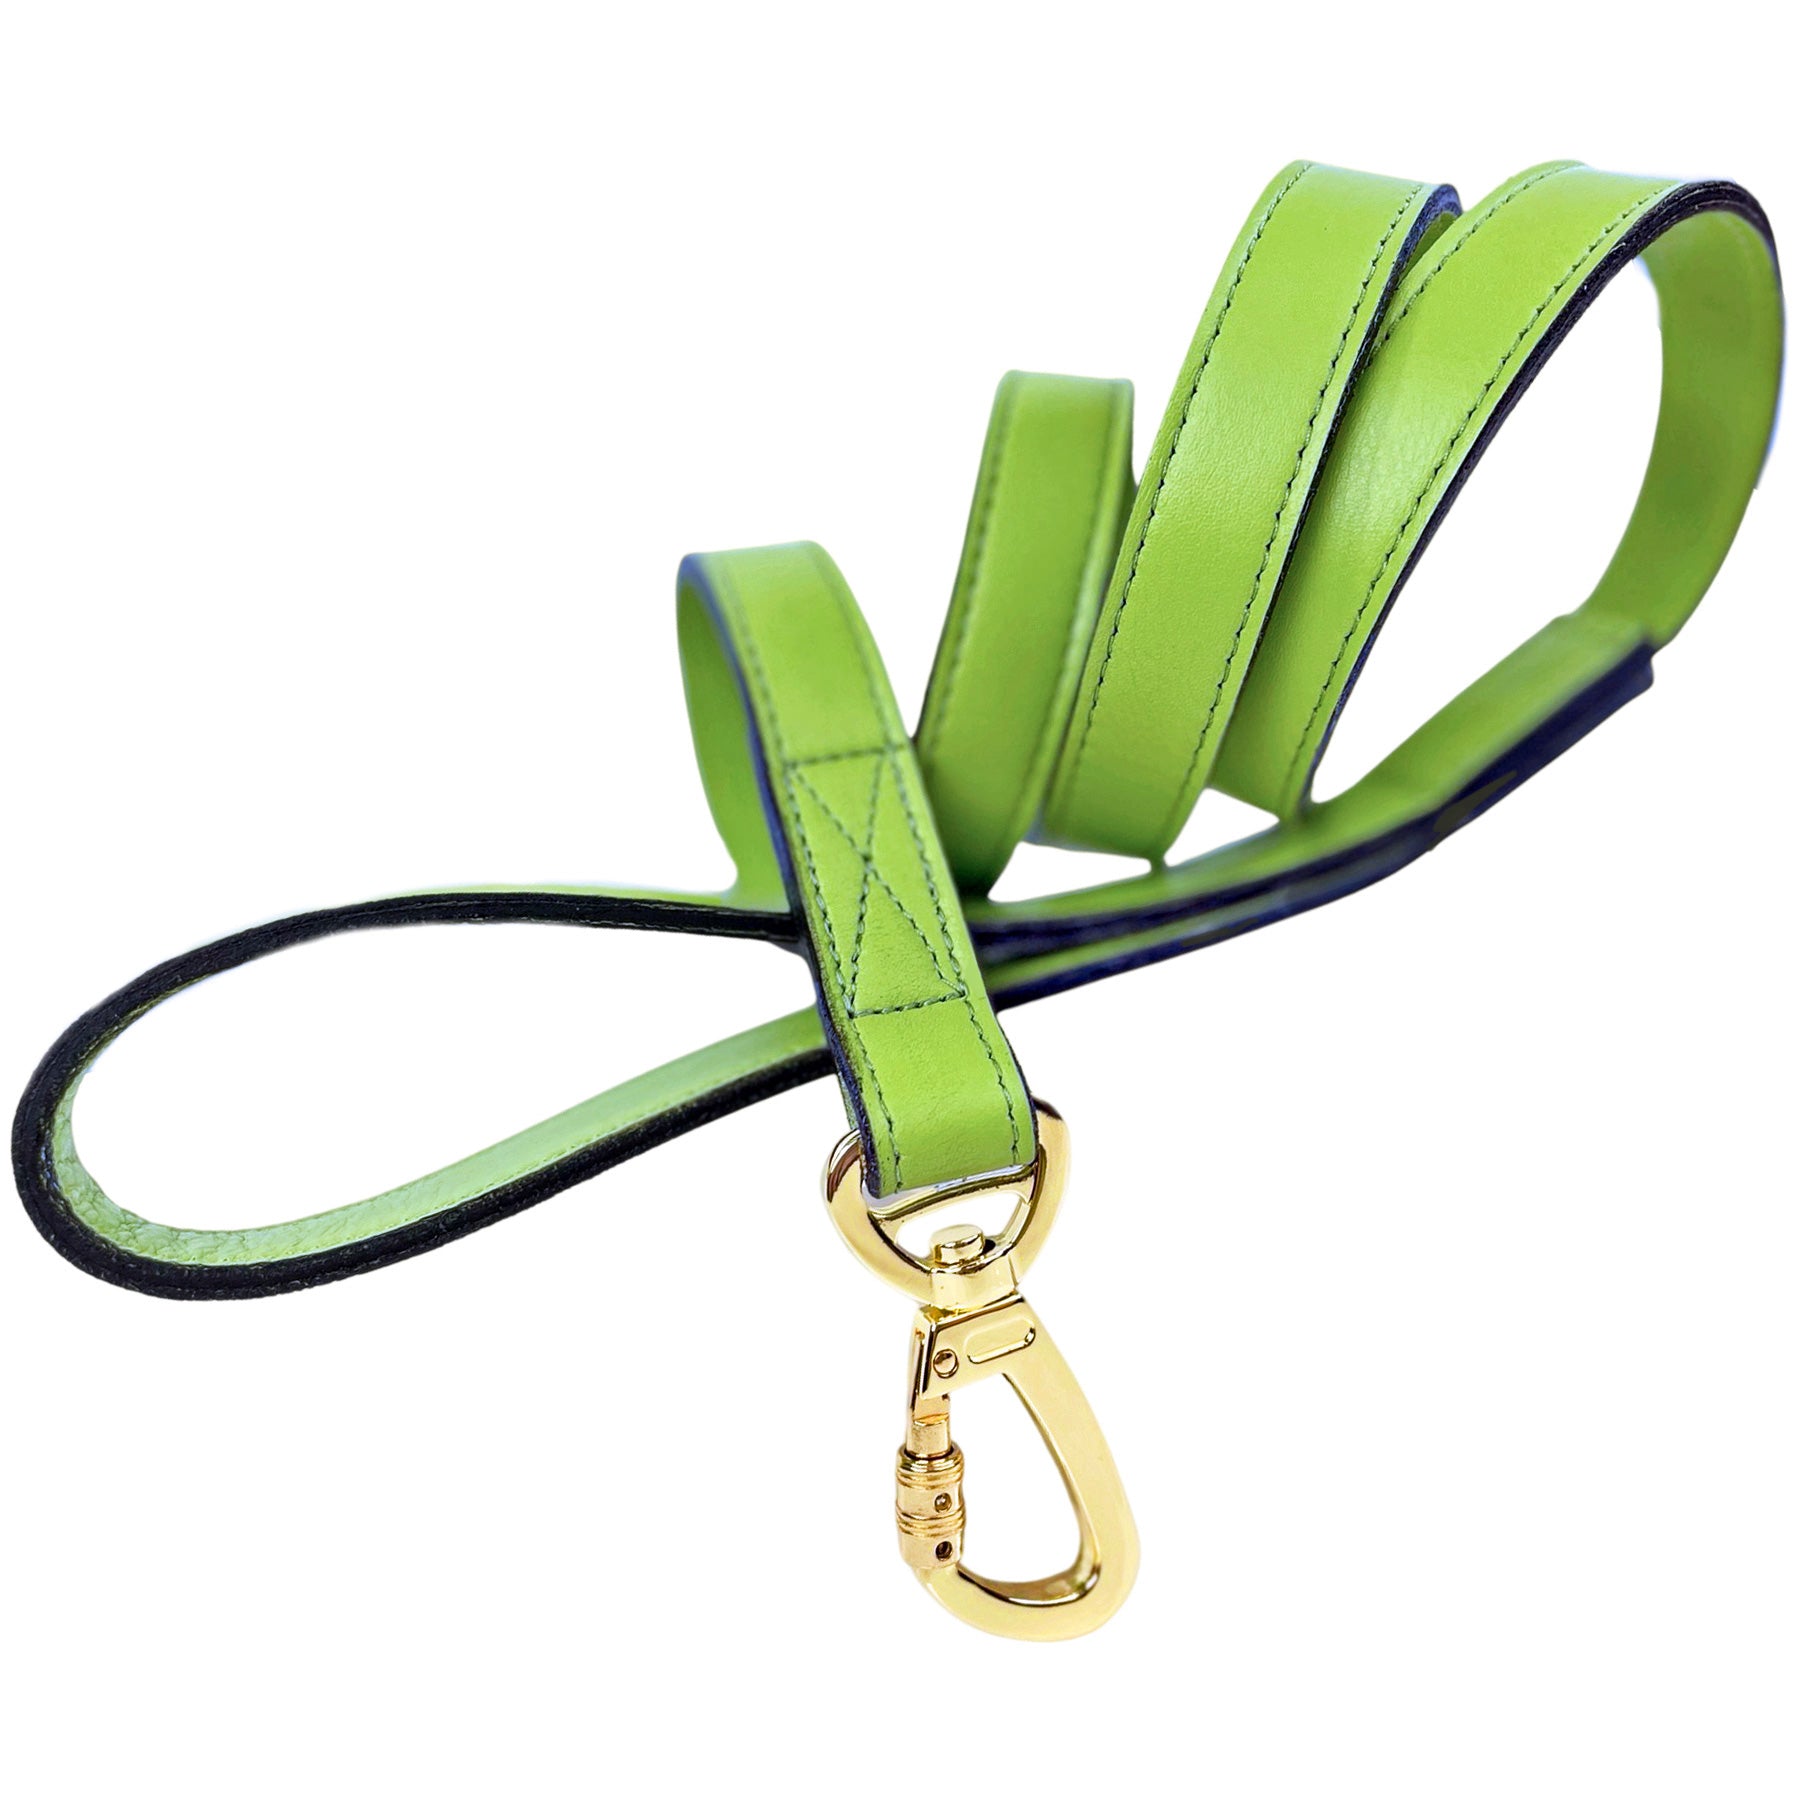 Daisy Dog Leash in Lime Green & Gold